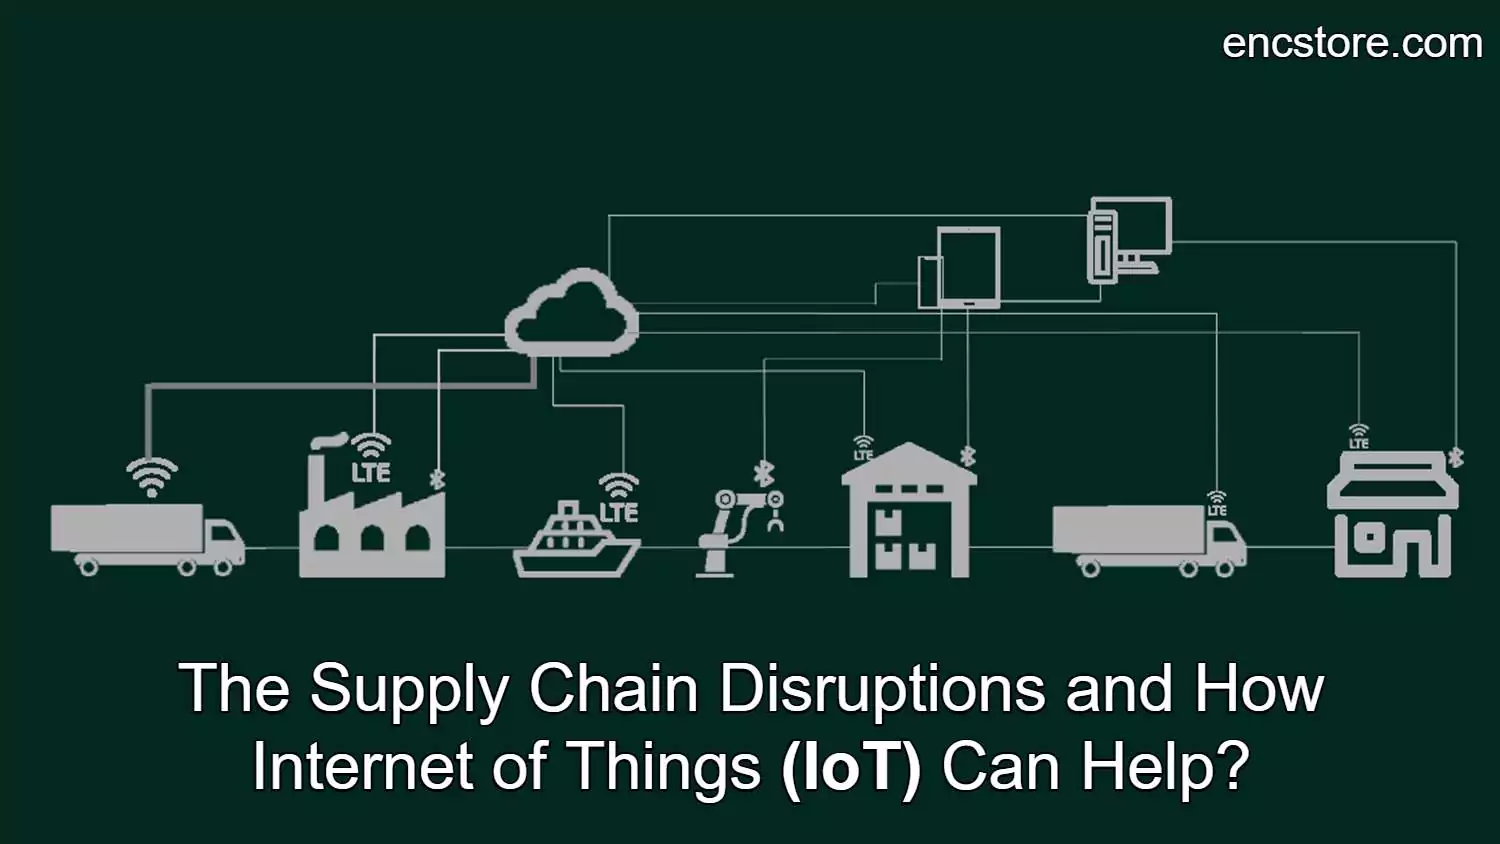 How Iot can help with supply chain disruptions